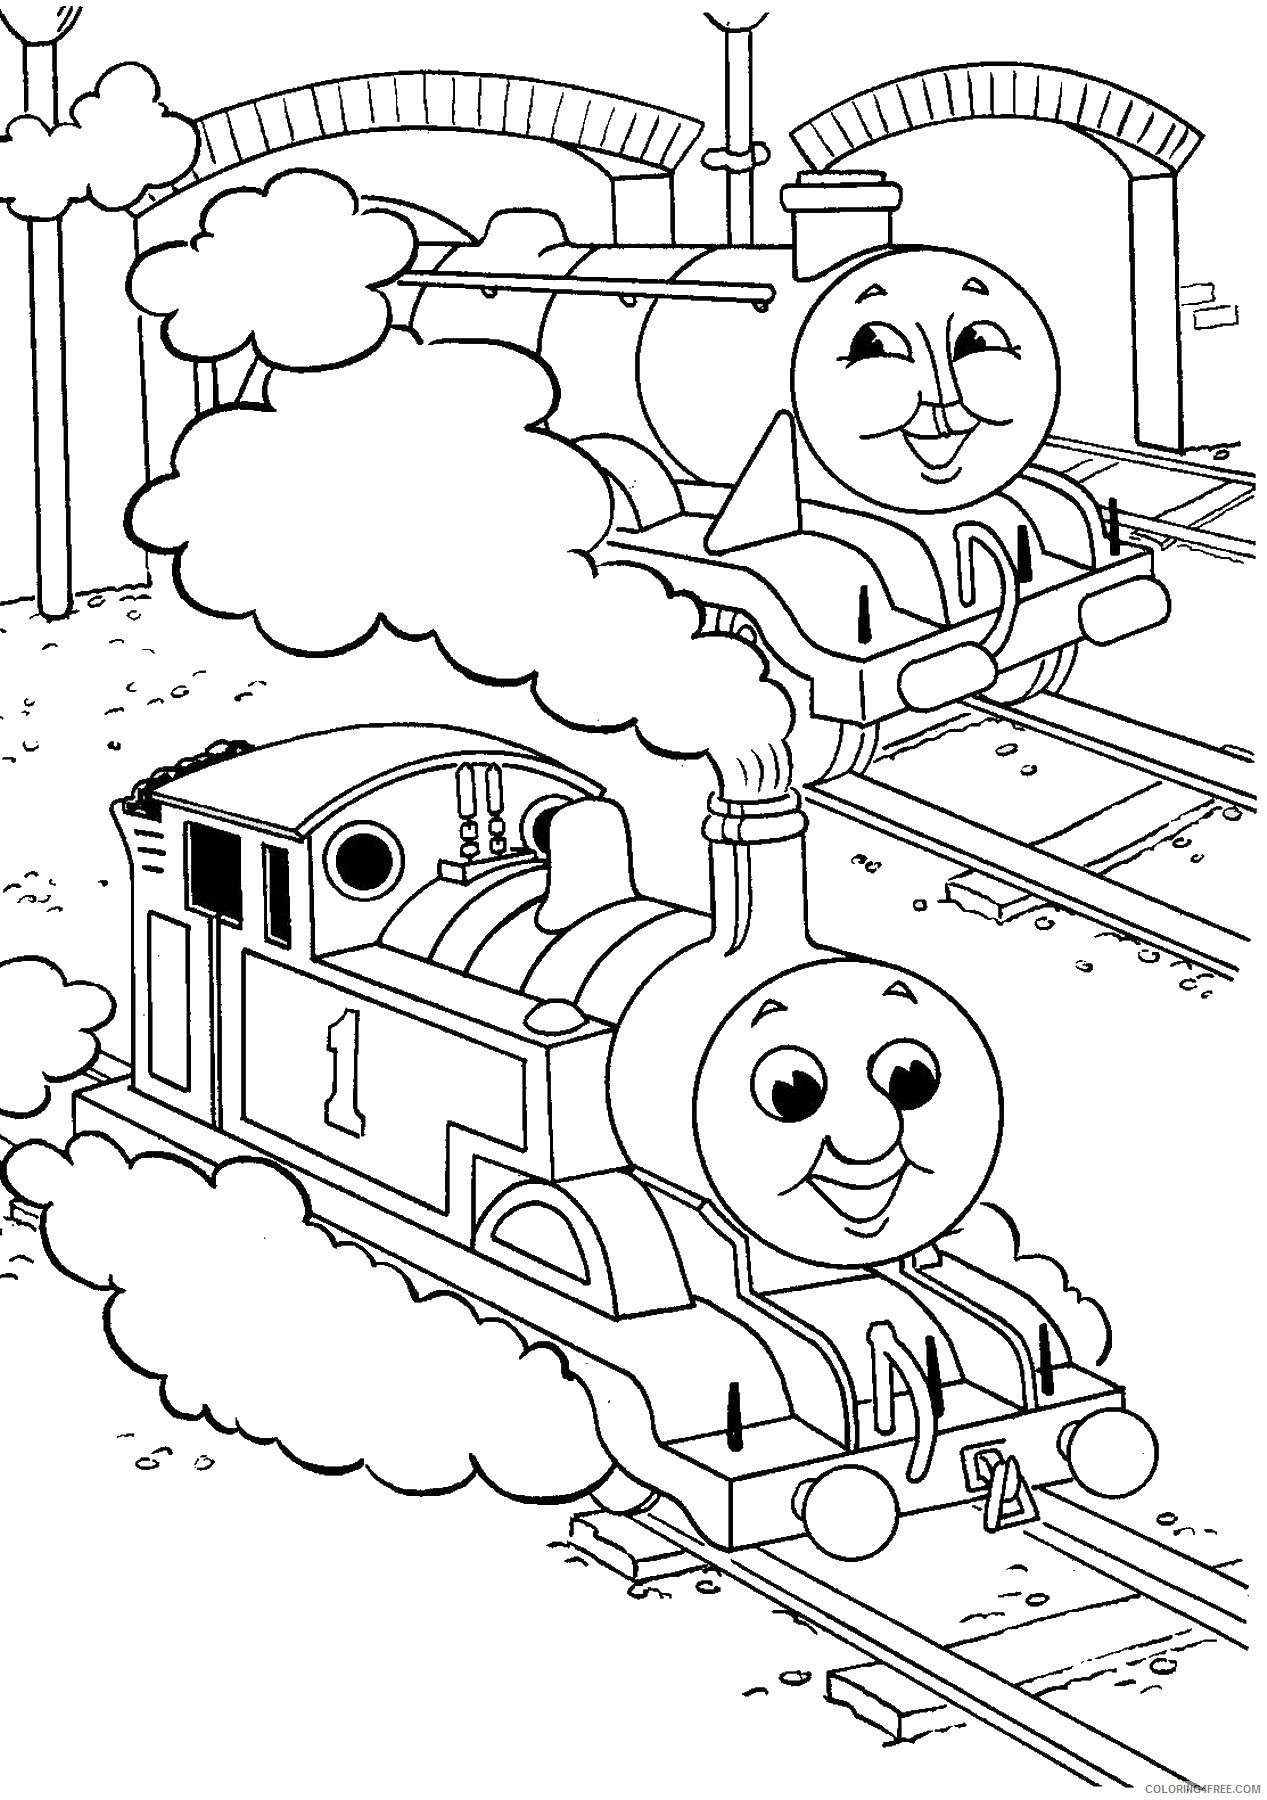 Thomas and Friends Coloring Pages Cartoons thomas_tank_engine_cl41 Printable 2020 6531 Coloring4free